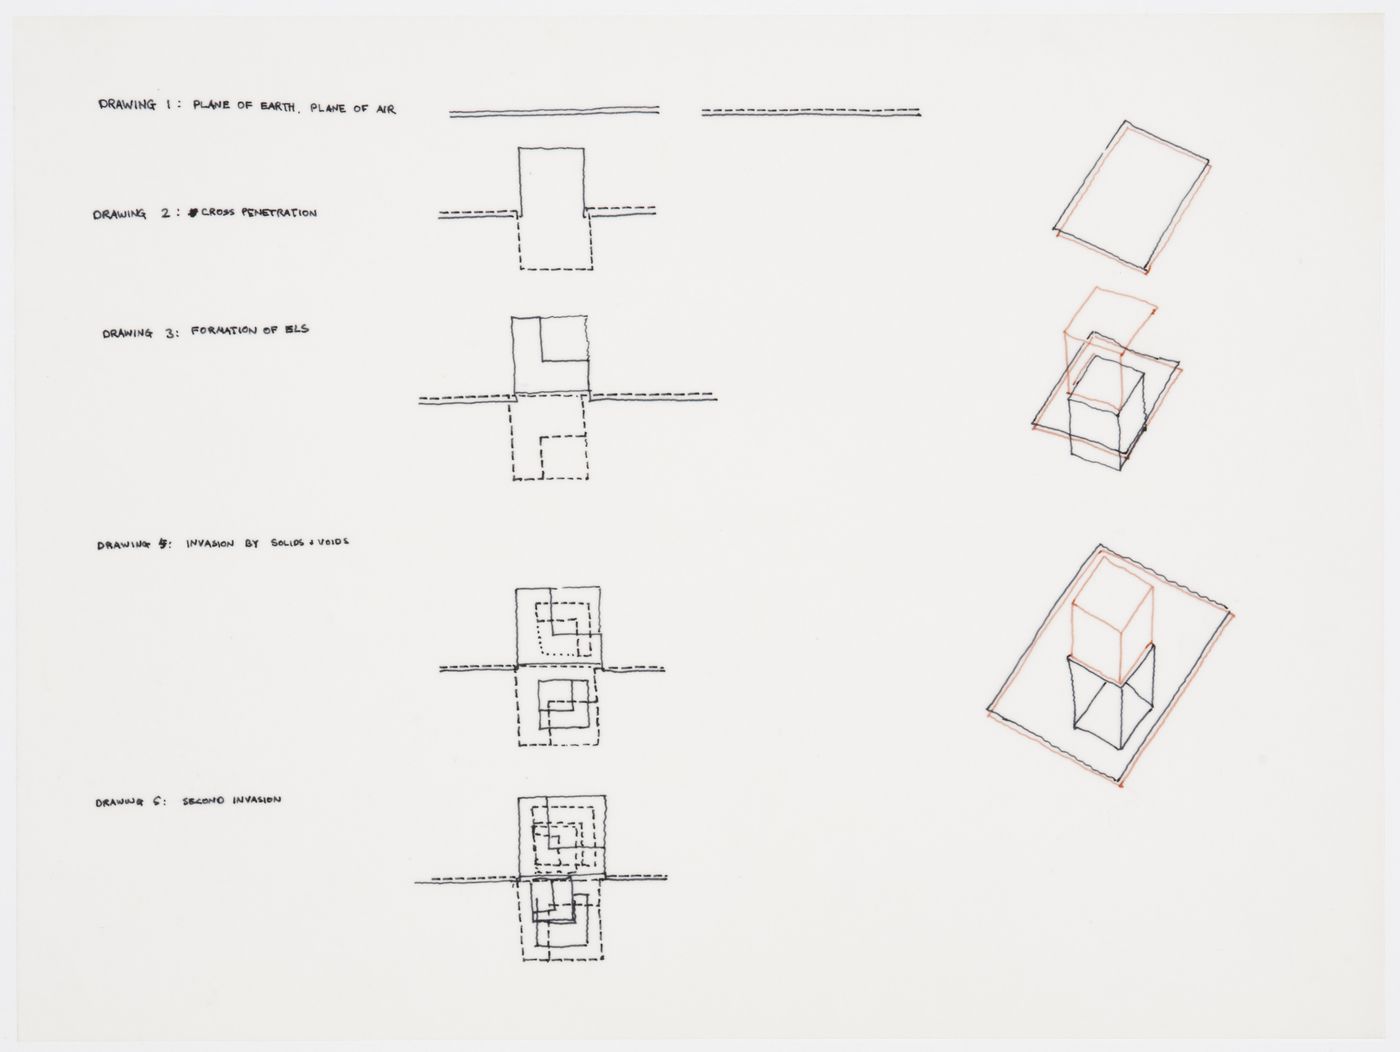 Conceptual sections and axonometrics with instructions for House 11a, Palo Alto, California